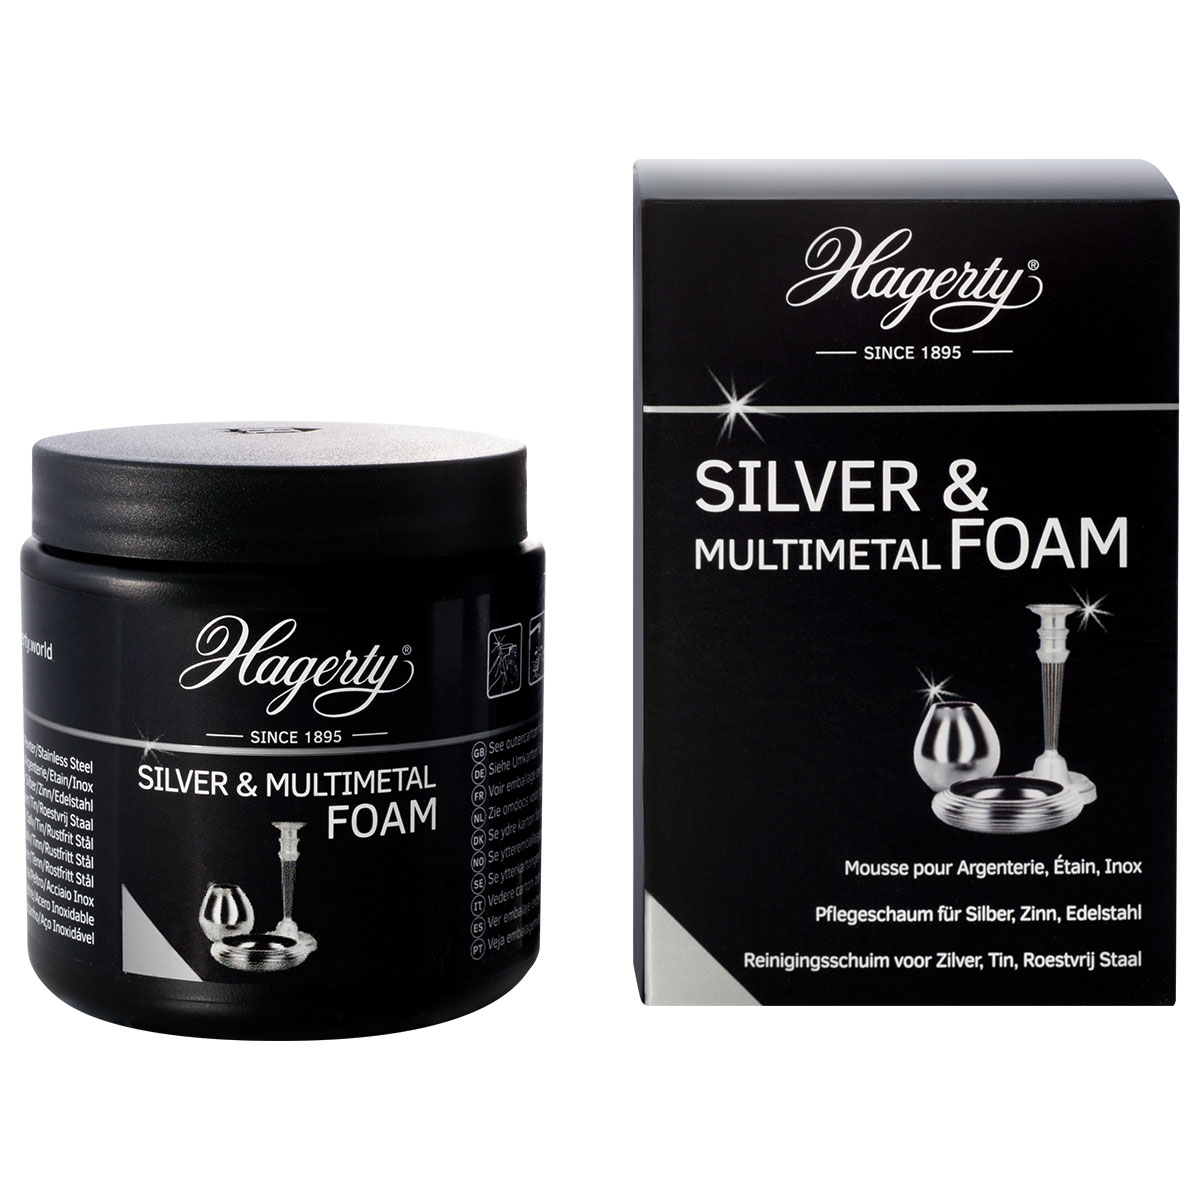 Hagerty Silver & Multimetal Foam, foaming paste for silver, tin and stainless steel, 185 g